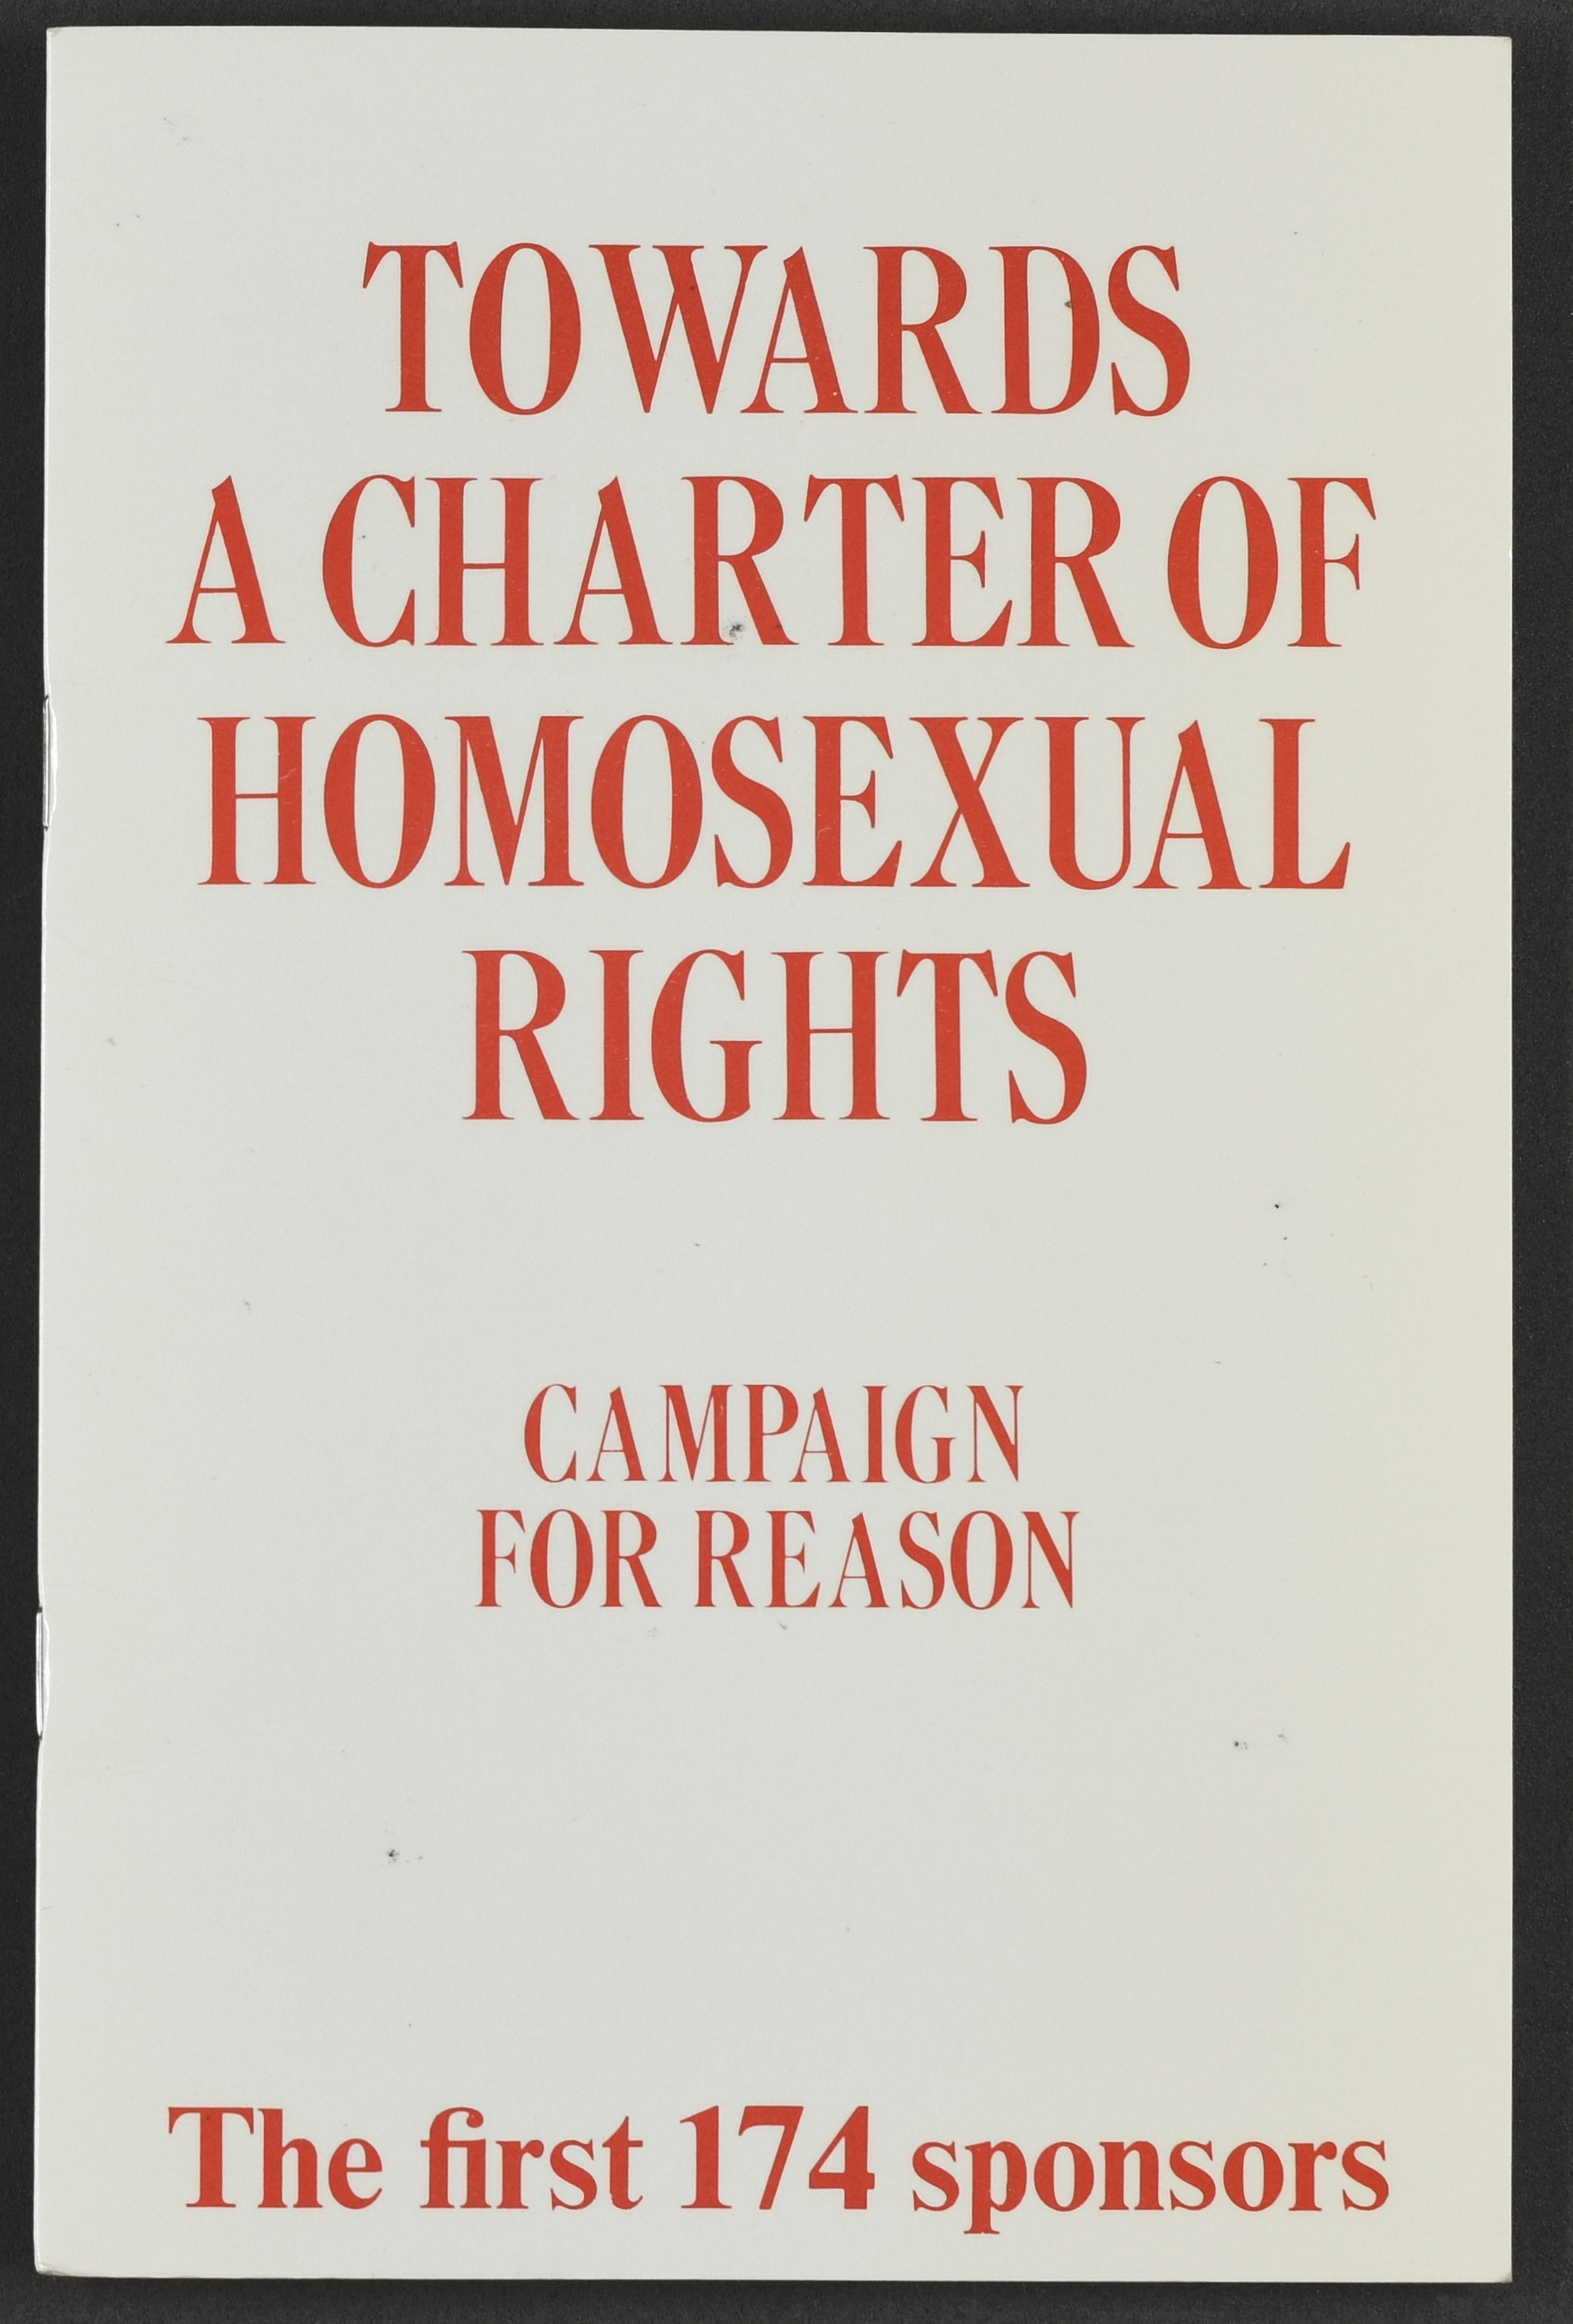 'Towards a Charter of Homosexual Rights: Campaign for Reason' pamphlet